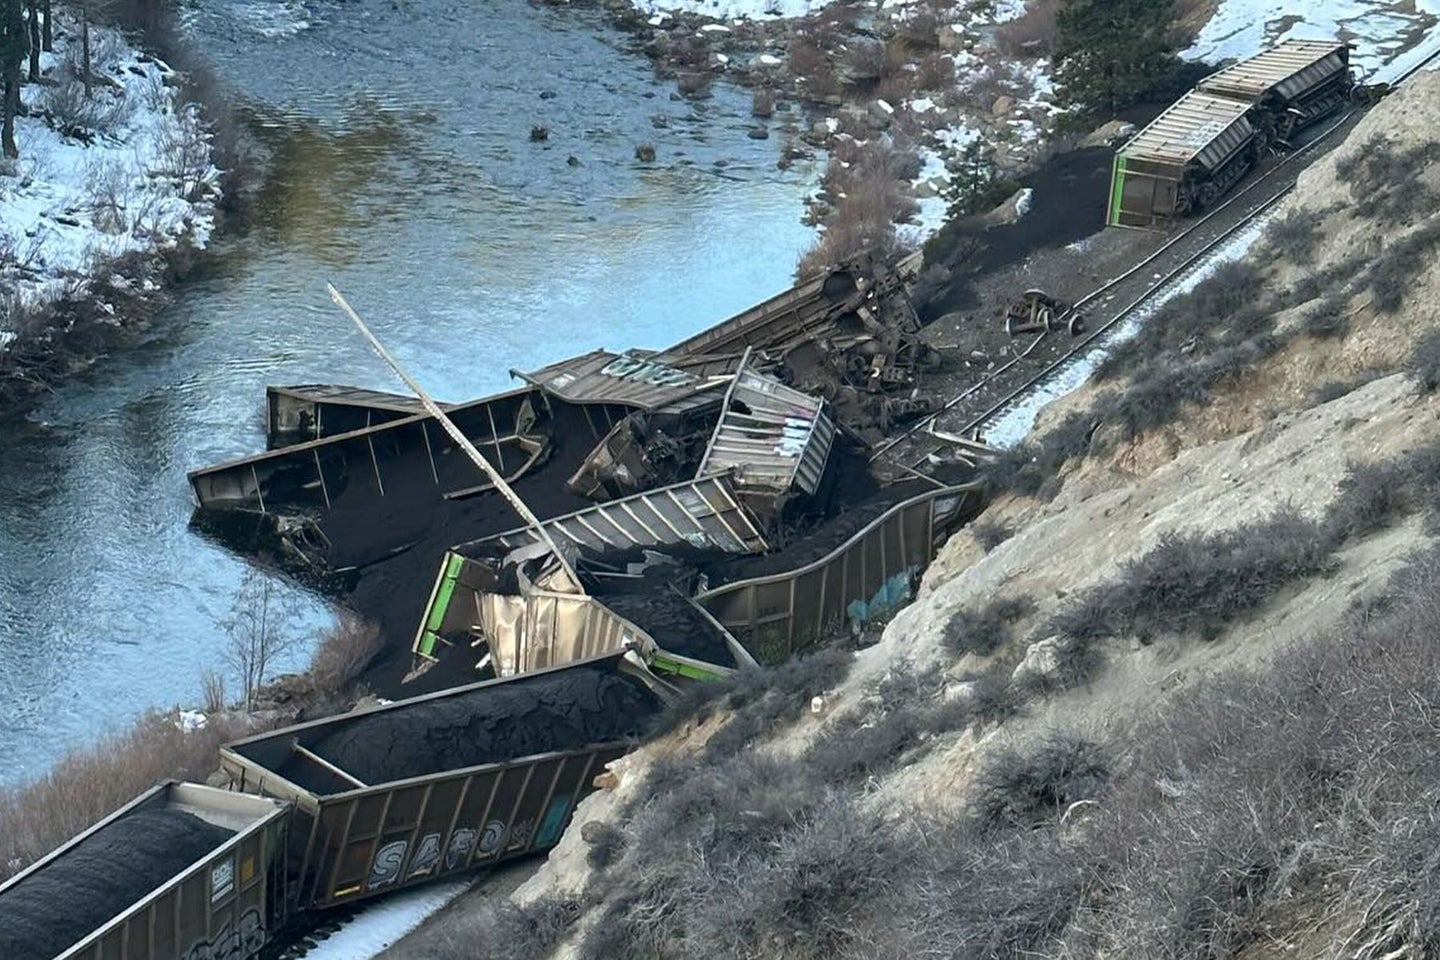 Train cars derailed into a protected river in California, spilling untold amounts of coal.